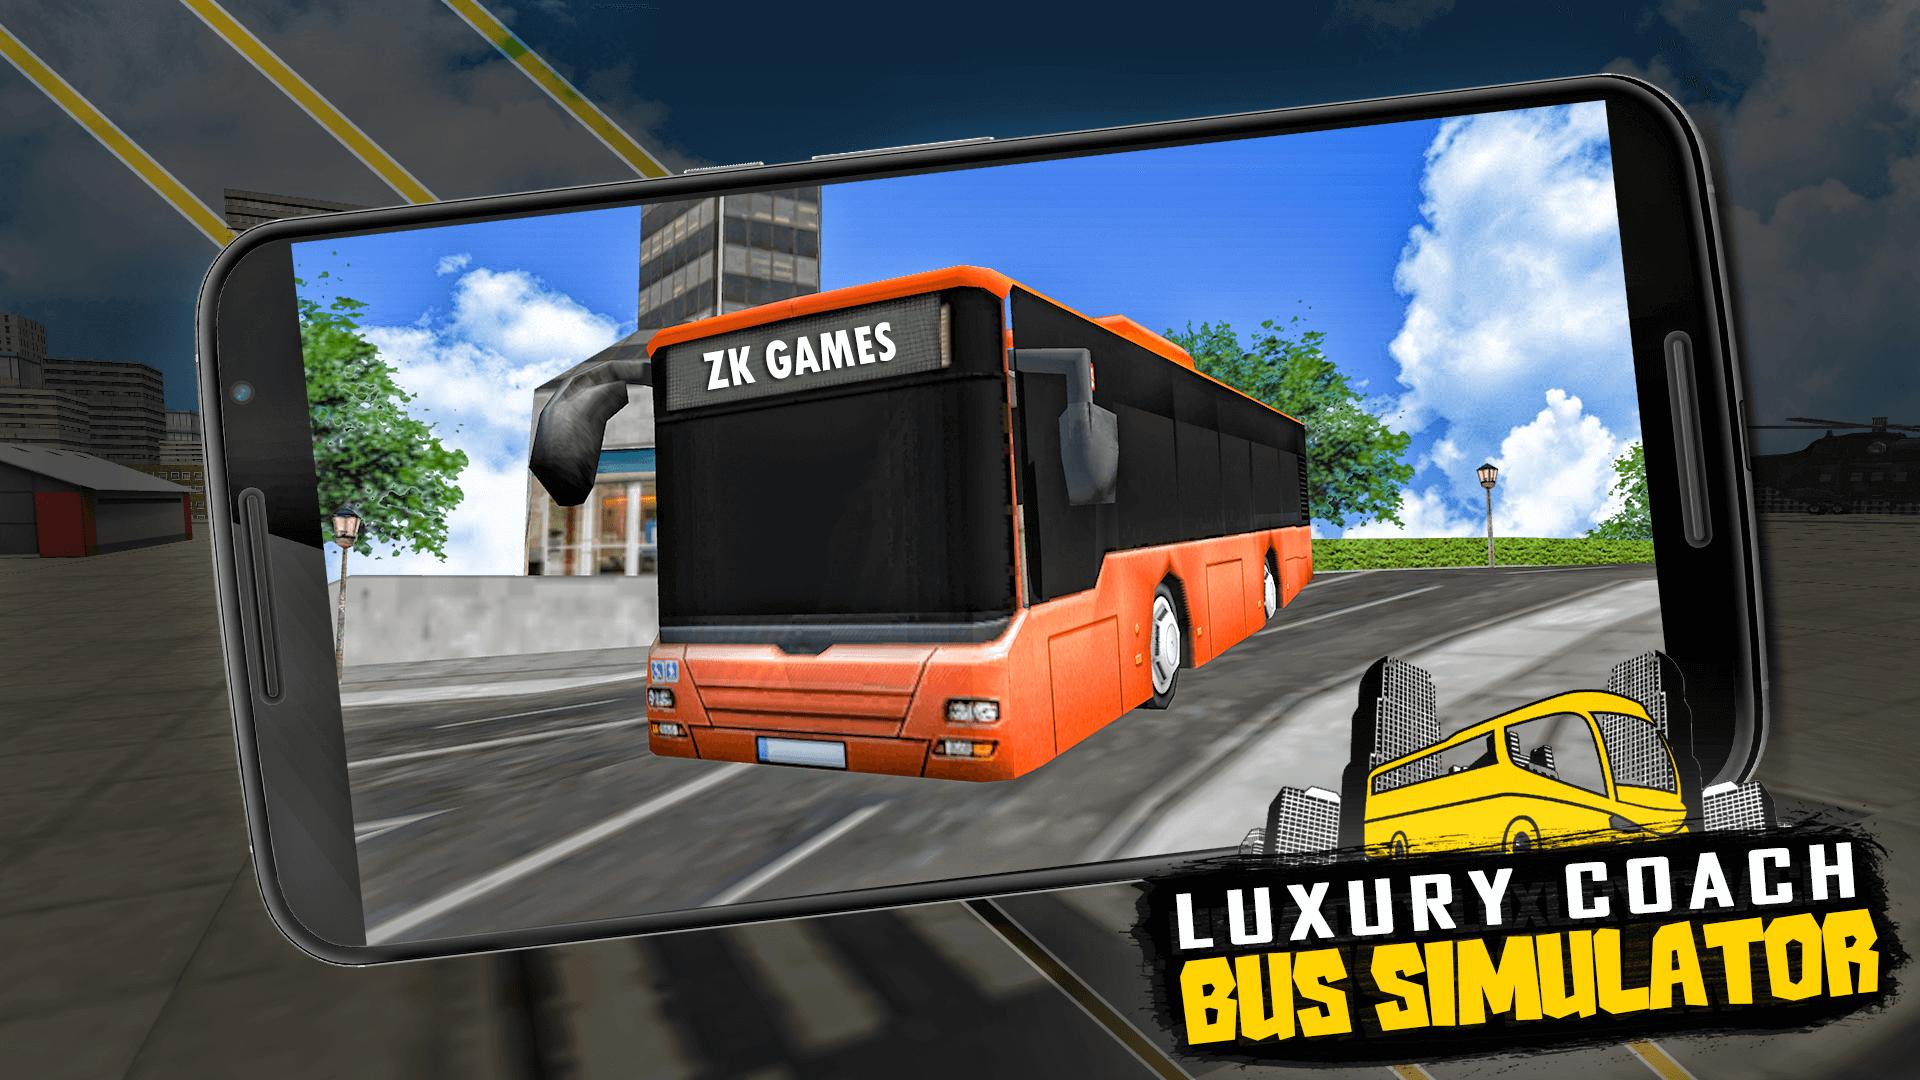 Luxury Coach Bus Simulator for Android - APK Download